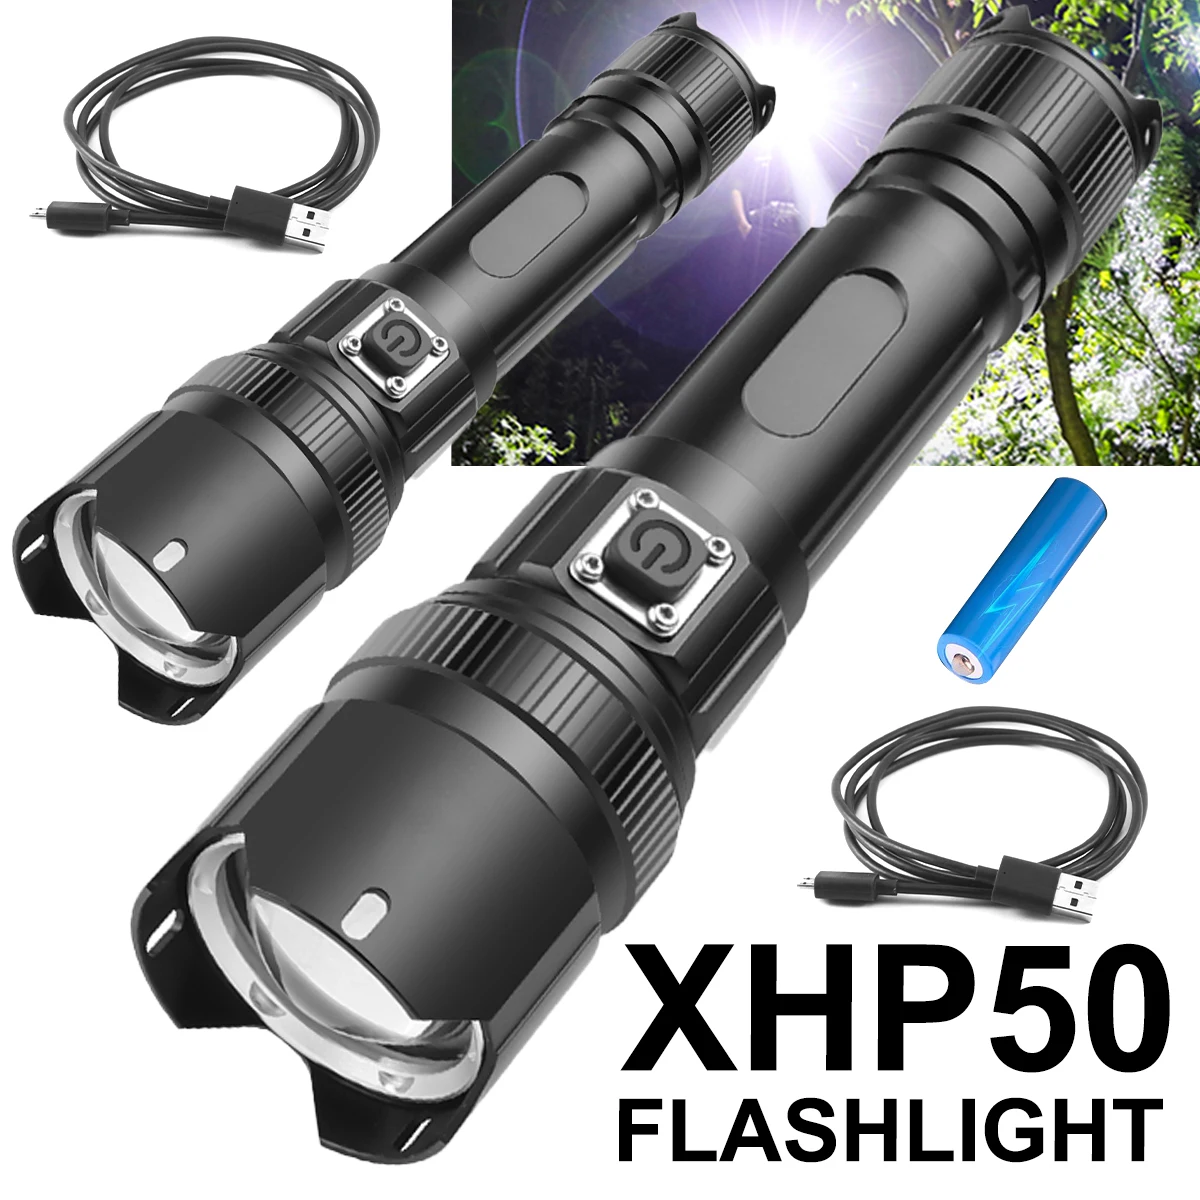 

Rechargeable XHP50 LED Tactical Flashlight 800-1000 Lumens Zoomable Torch Waterproof Camping Emergency Searchlight Flashlight